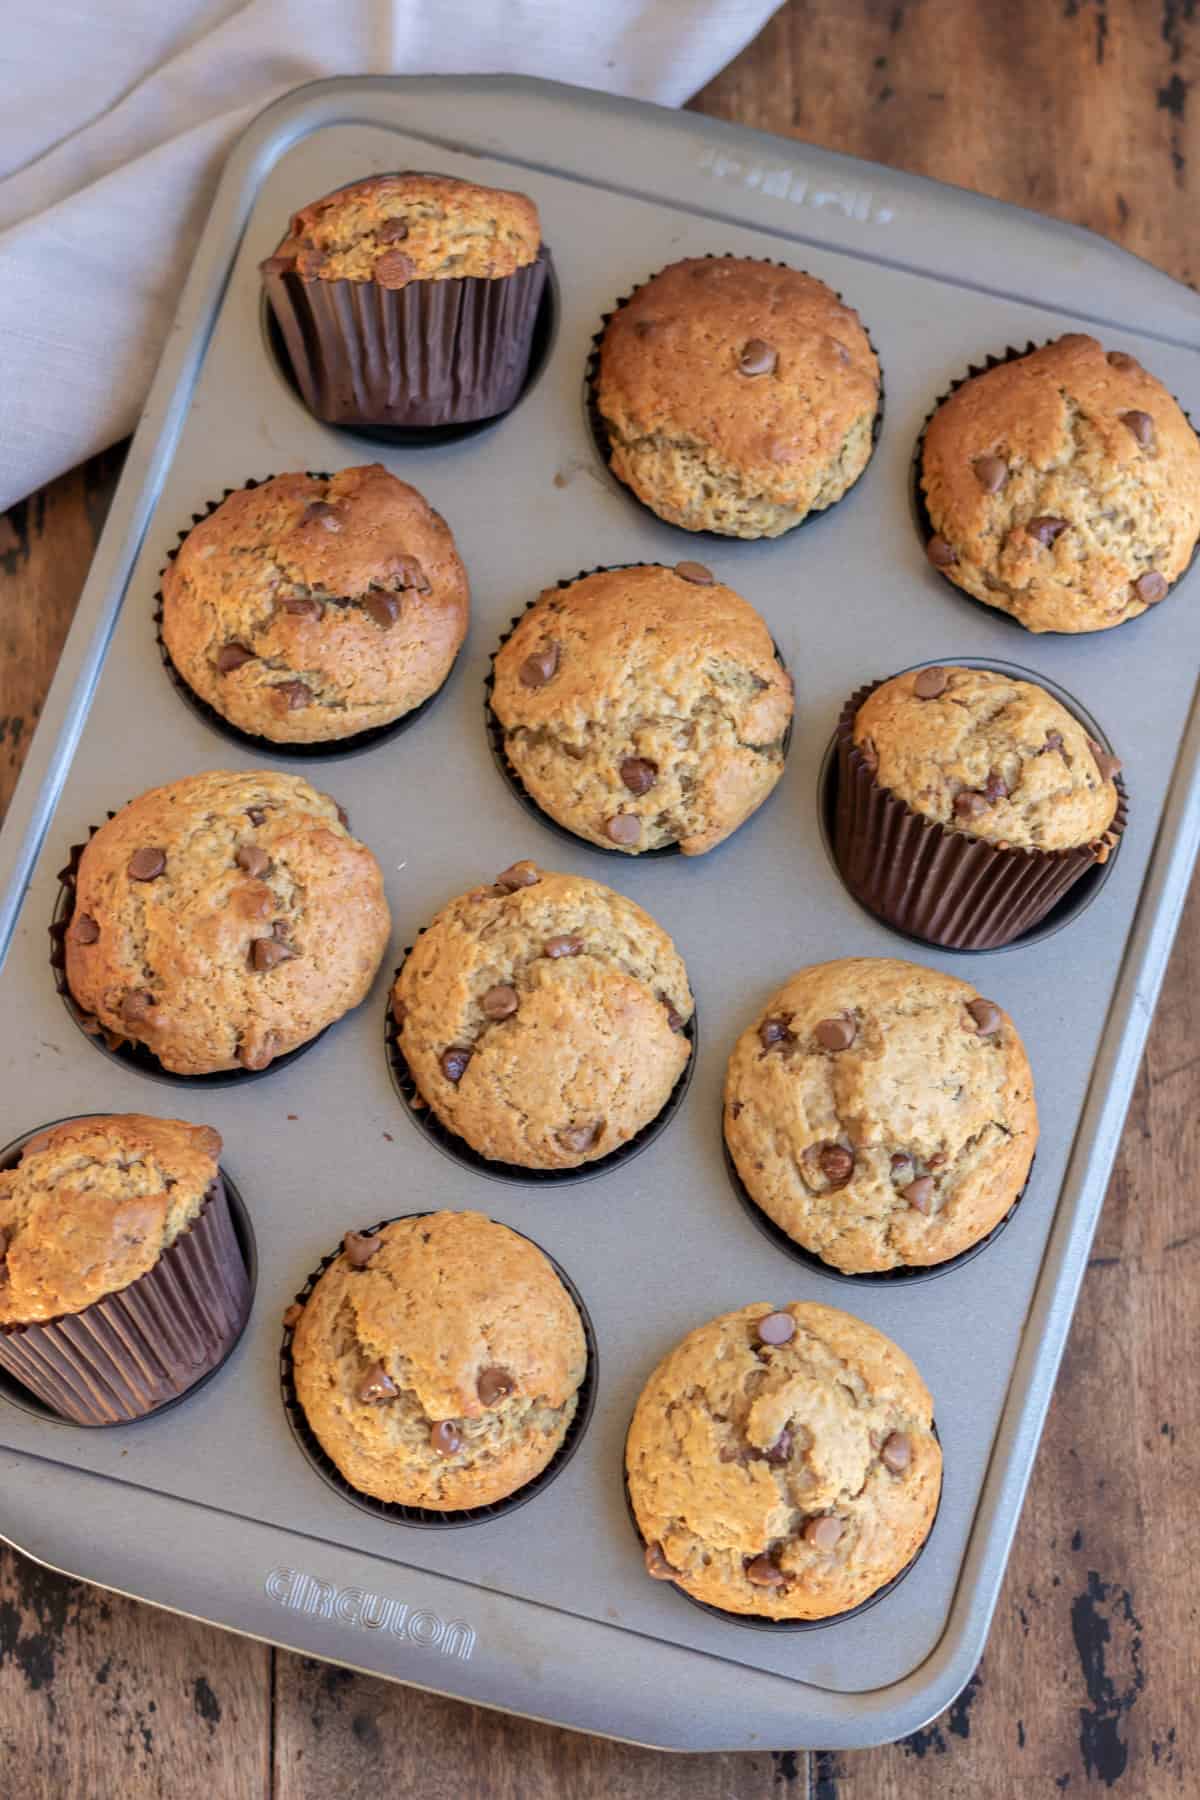 Baked chocolate chip peanut butter muffins cooling in a pan.